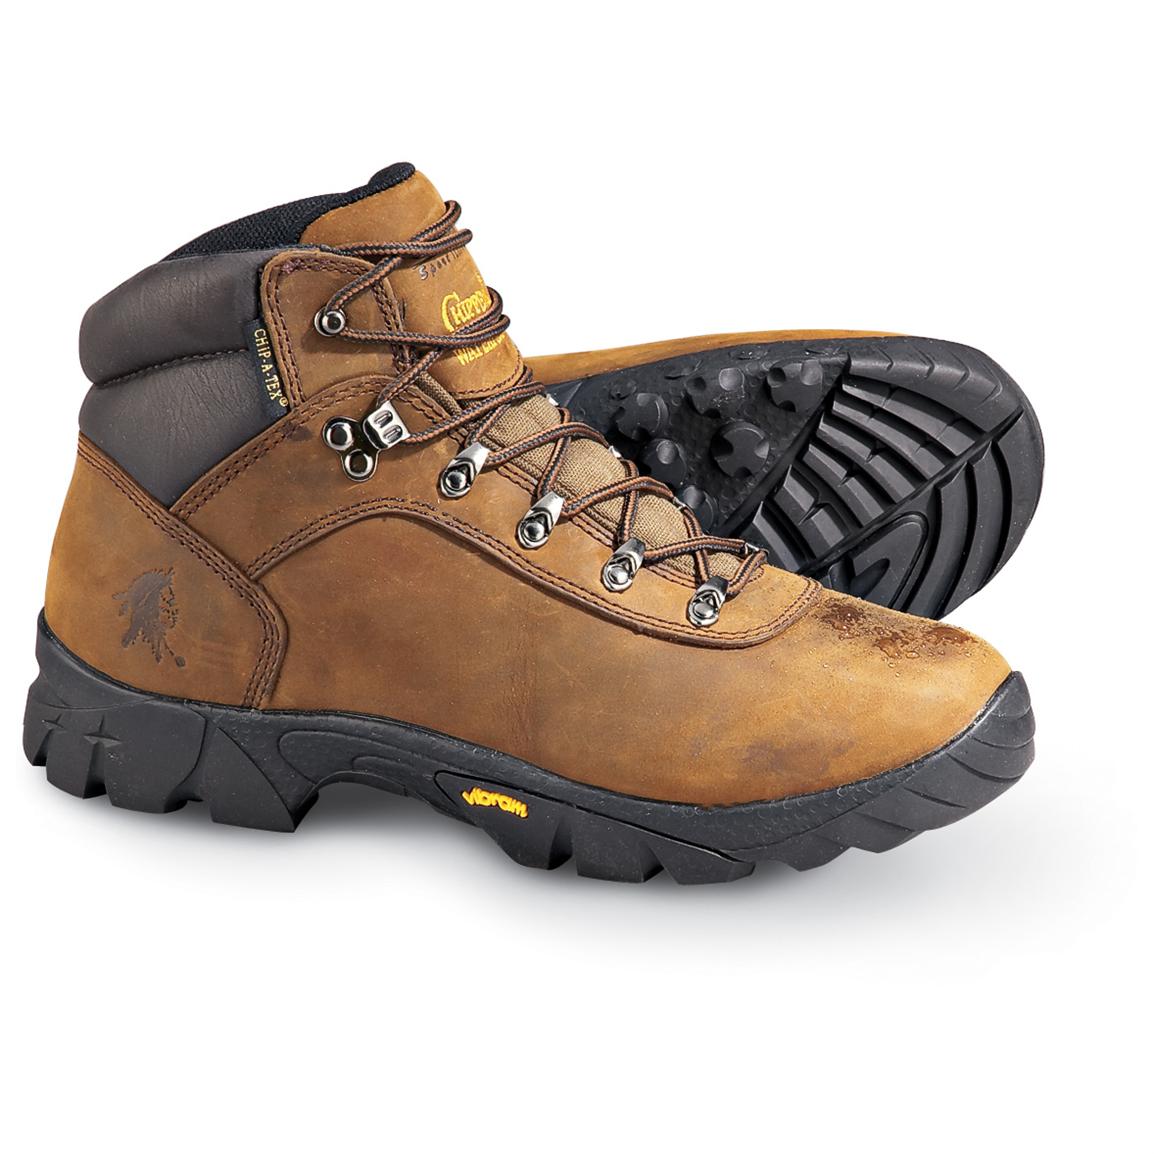 mens insulated hiking boots